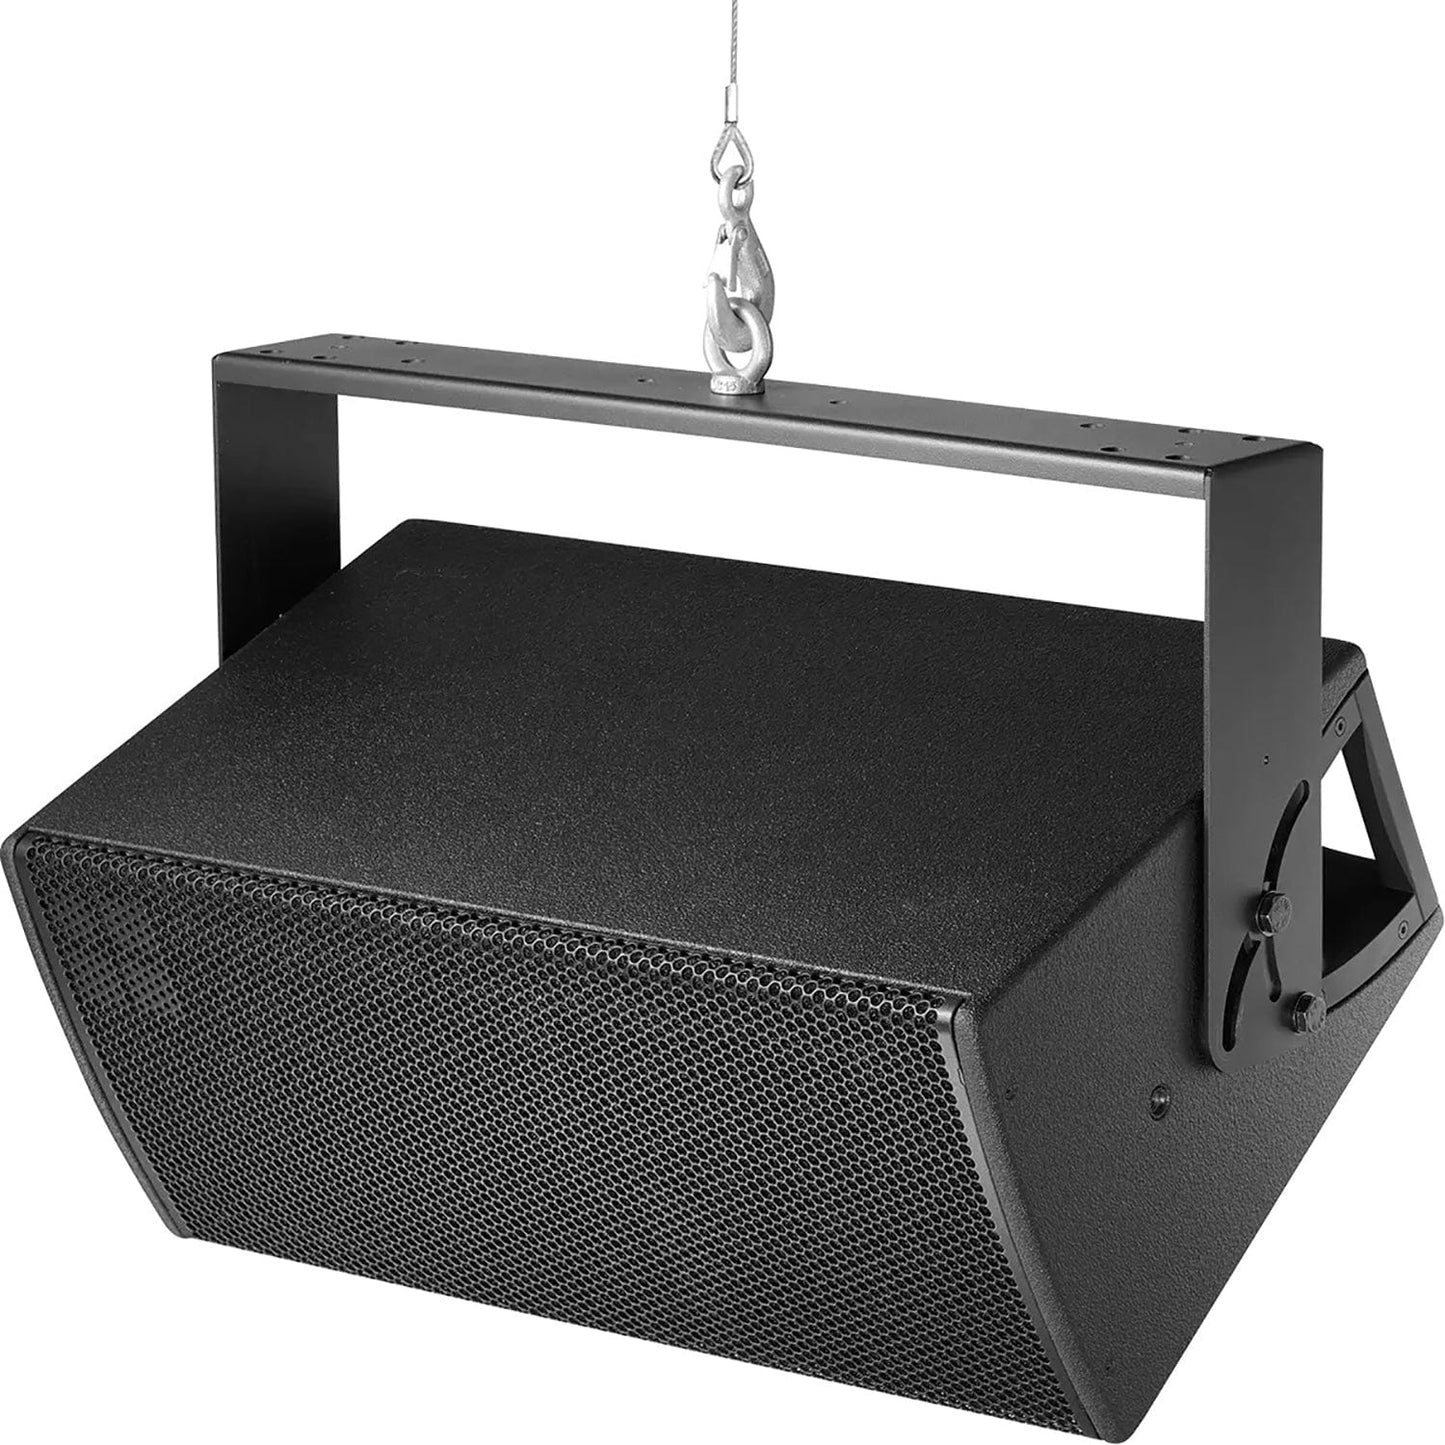 D&B Audiotechnik Z0702.002 Y7P Loudspeaker with NLT4 F/M Connections - PSSL ProSound and Stage Lighting